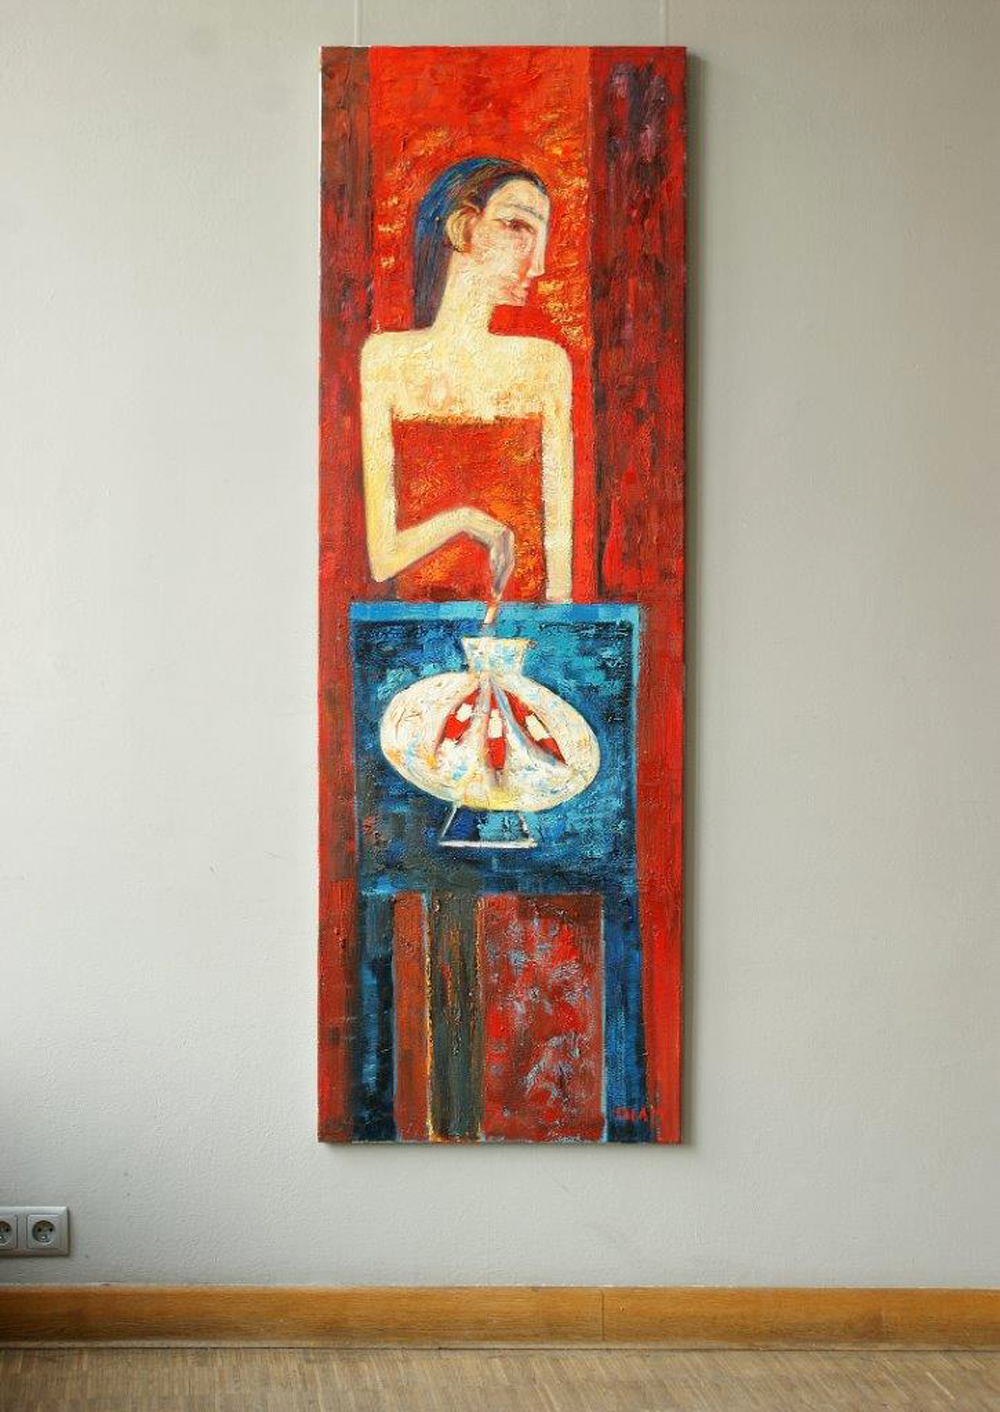 Darek Pala - Woman with fishes in aquarium (Oil on Canvas | Size: 60 x 180 cm | Price: 9000 PLN)